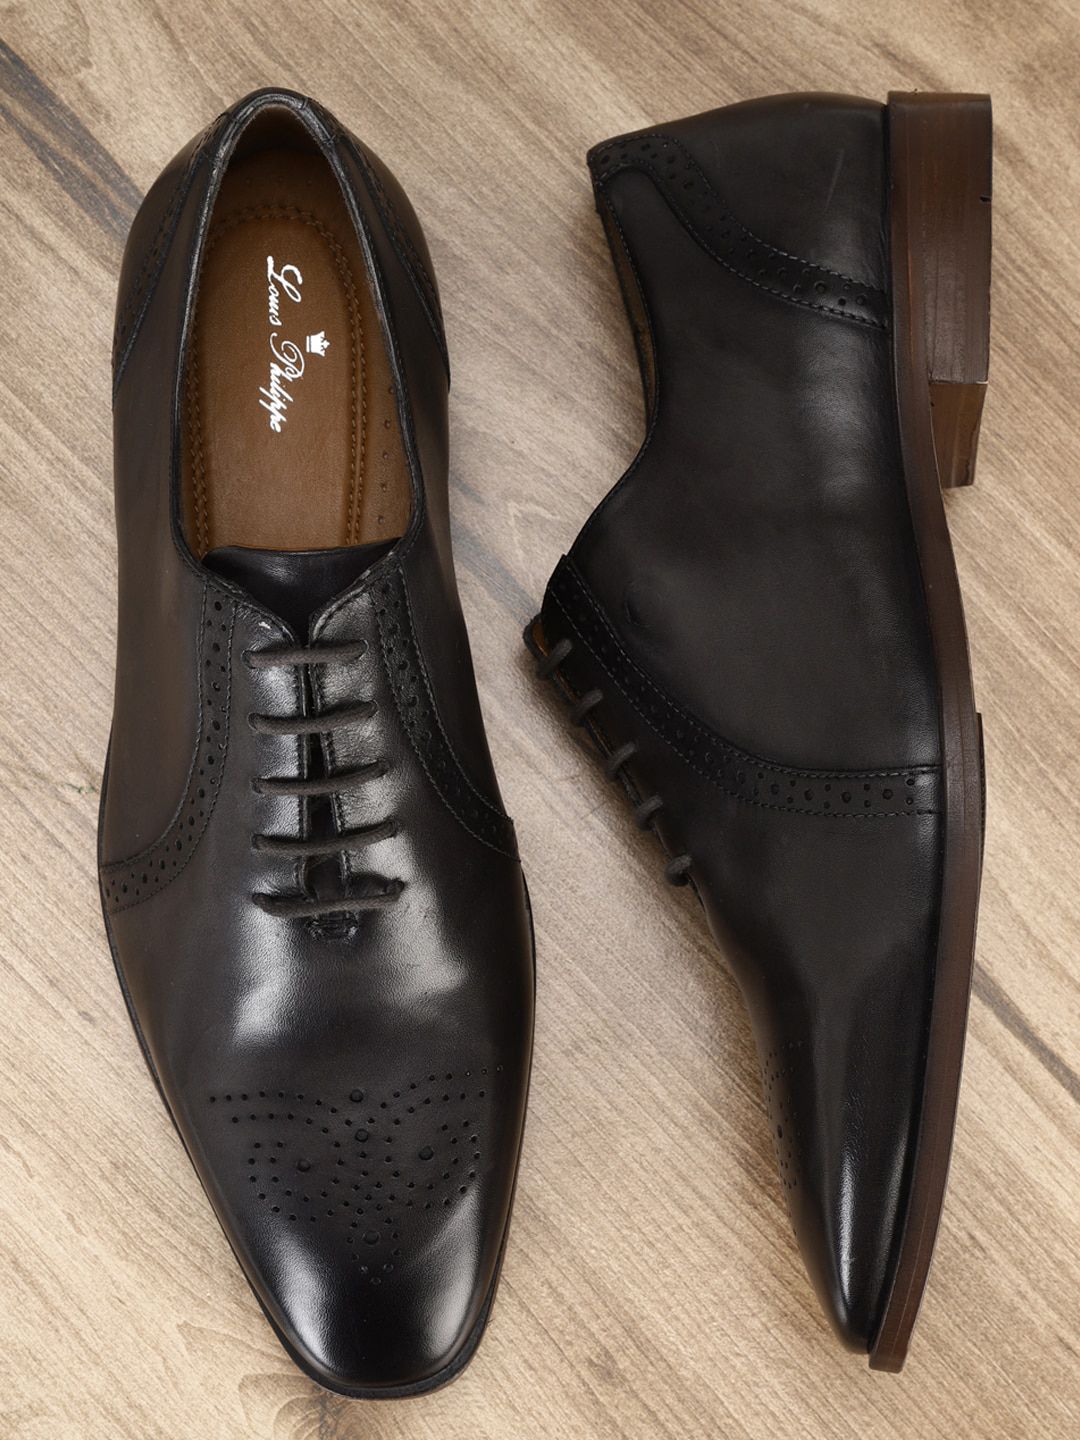 Louis Philippe Black Formal Shoes: Buy Louis Philippe Black Formal Shoes  Online at Best Price in India